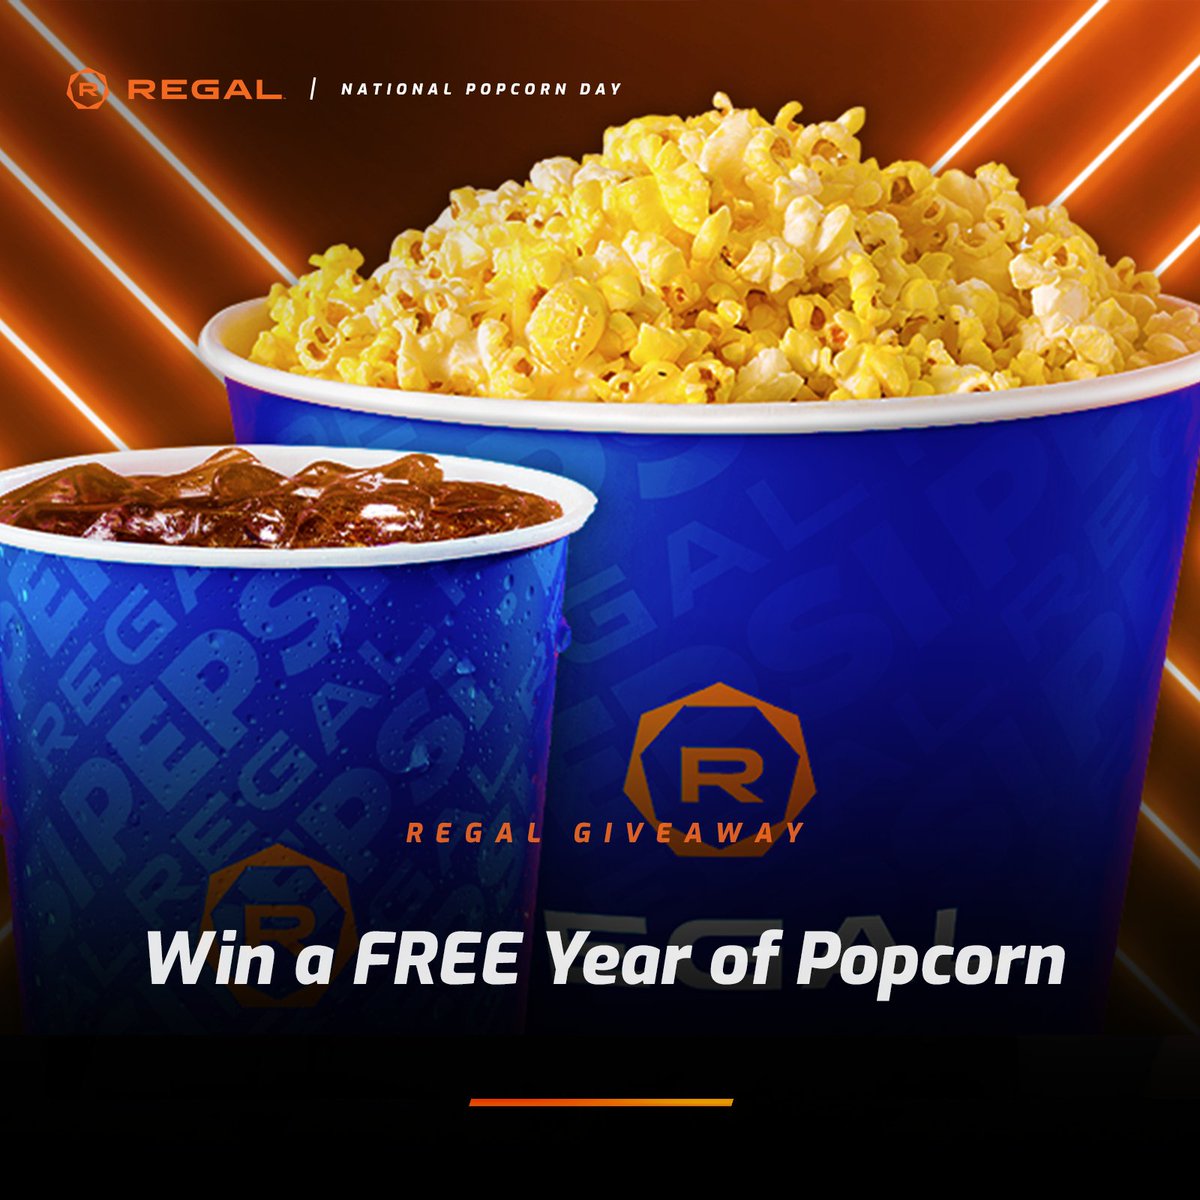 We are giving away FREE POPCORN FOR A YEAR in honor of National Popcorn Day! How to enter: ✔️ RETWEET this post ✔️ LIKE this post ✔️ FOLLOW @RegalMovies Good luck and happy #NationalPopcornDay OFFICIAL RULES: regmovi.es/3knq2QB